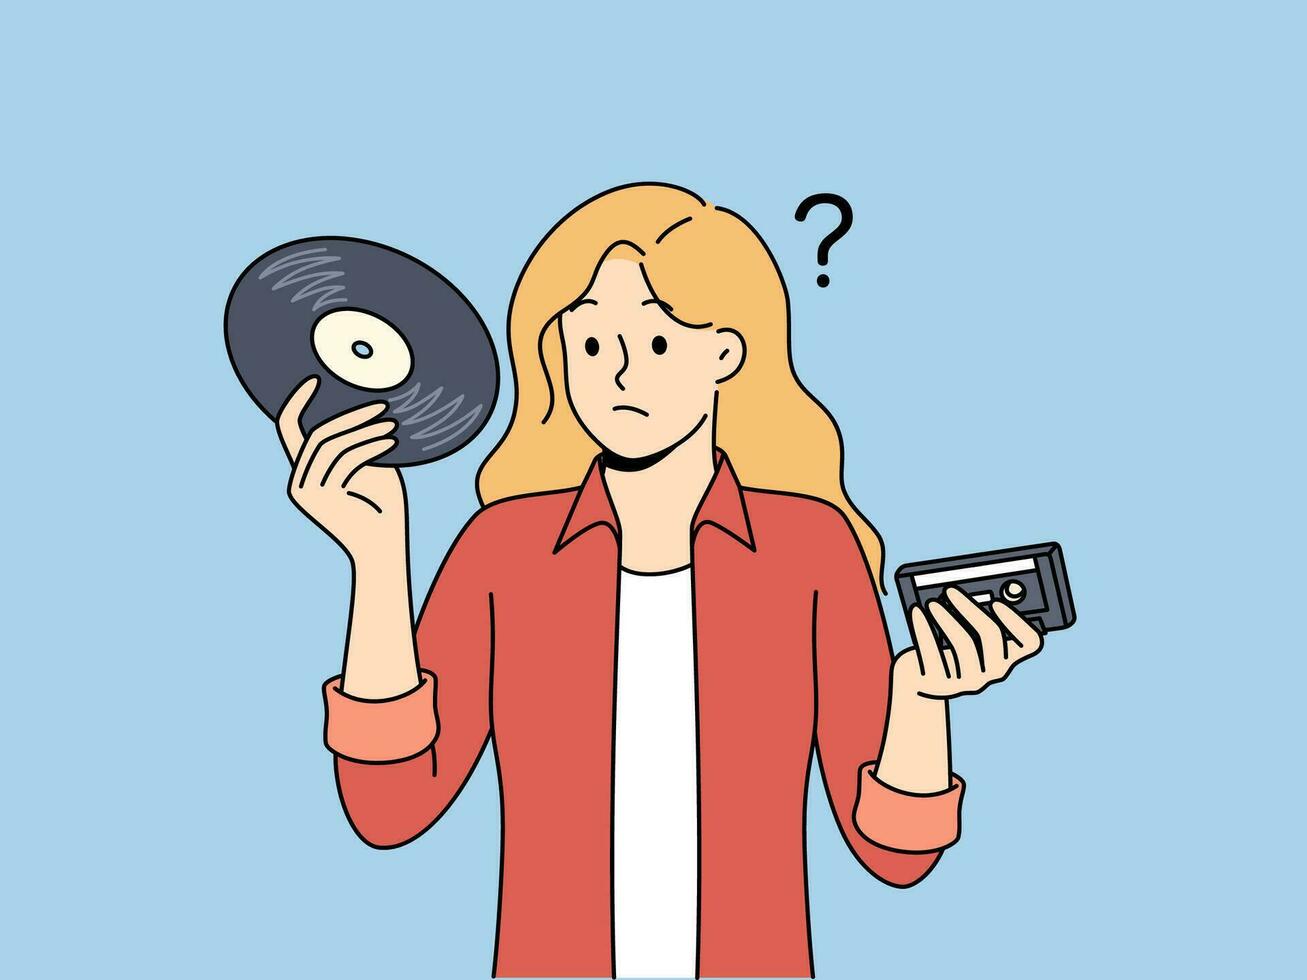 Girl with vinyl record and tape cassette looks confusedly at old-fashioned storage media with music vector